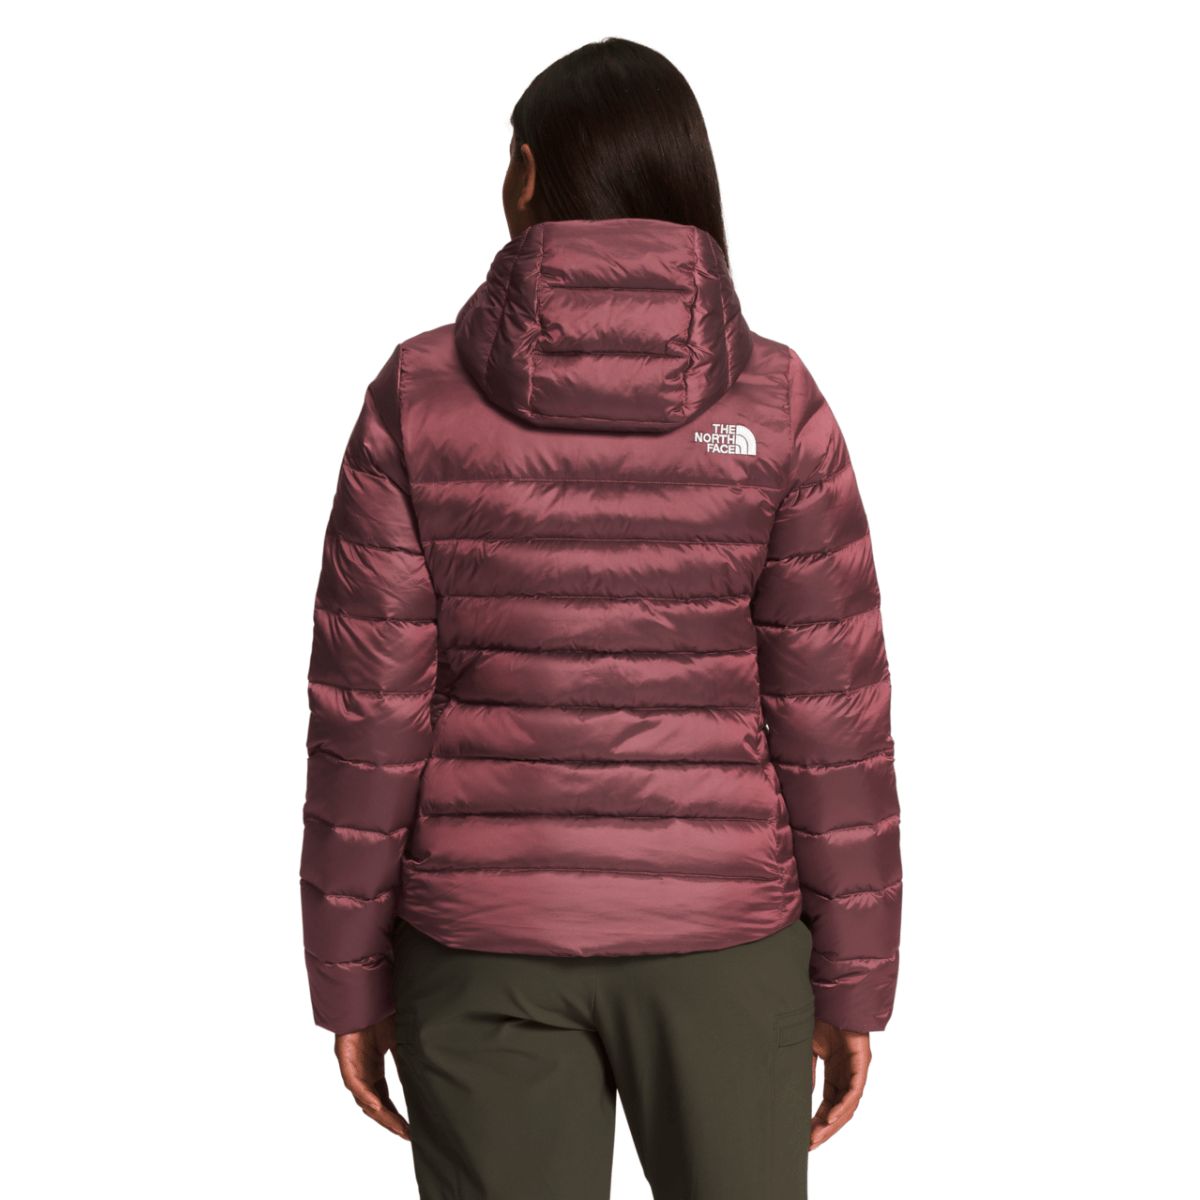 The North Face Aconcagua Hoodie - Women's - Al's Sporting Goods: Your  One-Stop Shop for Outdoor Sports Gear & Apparel